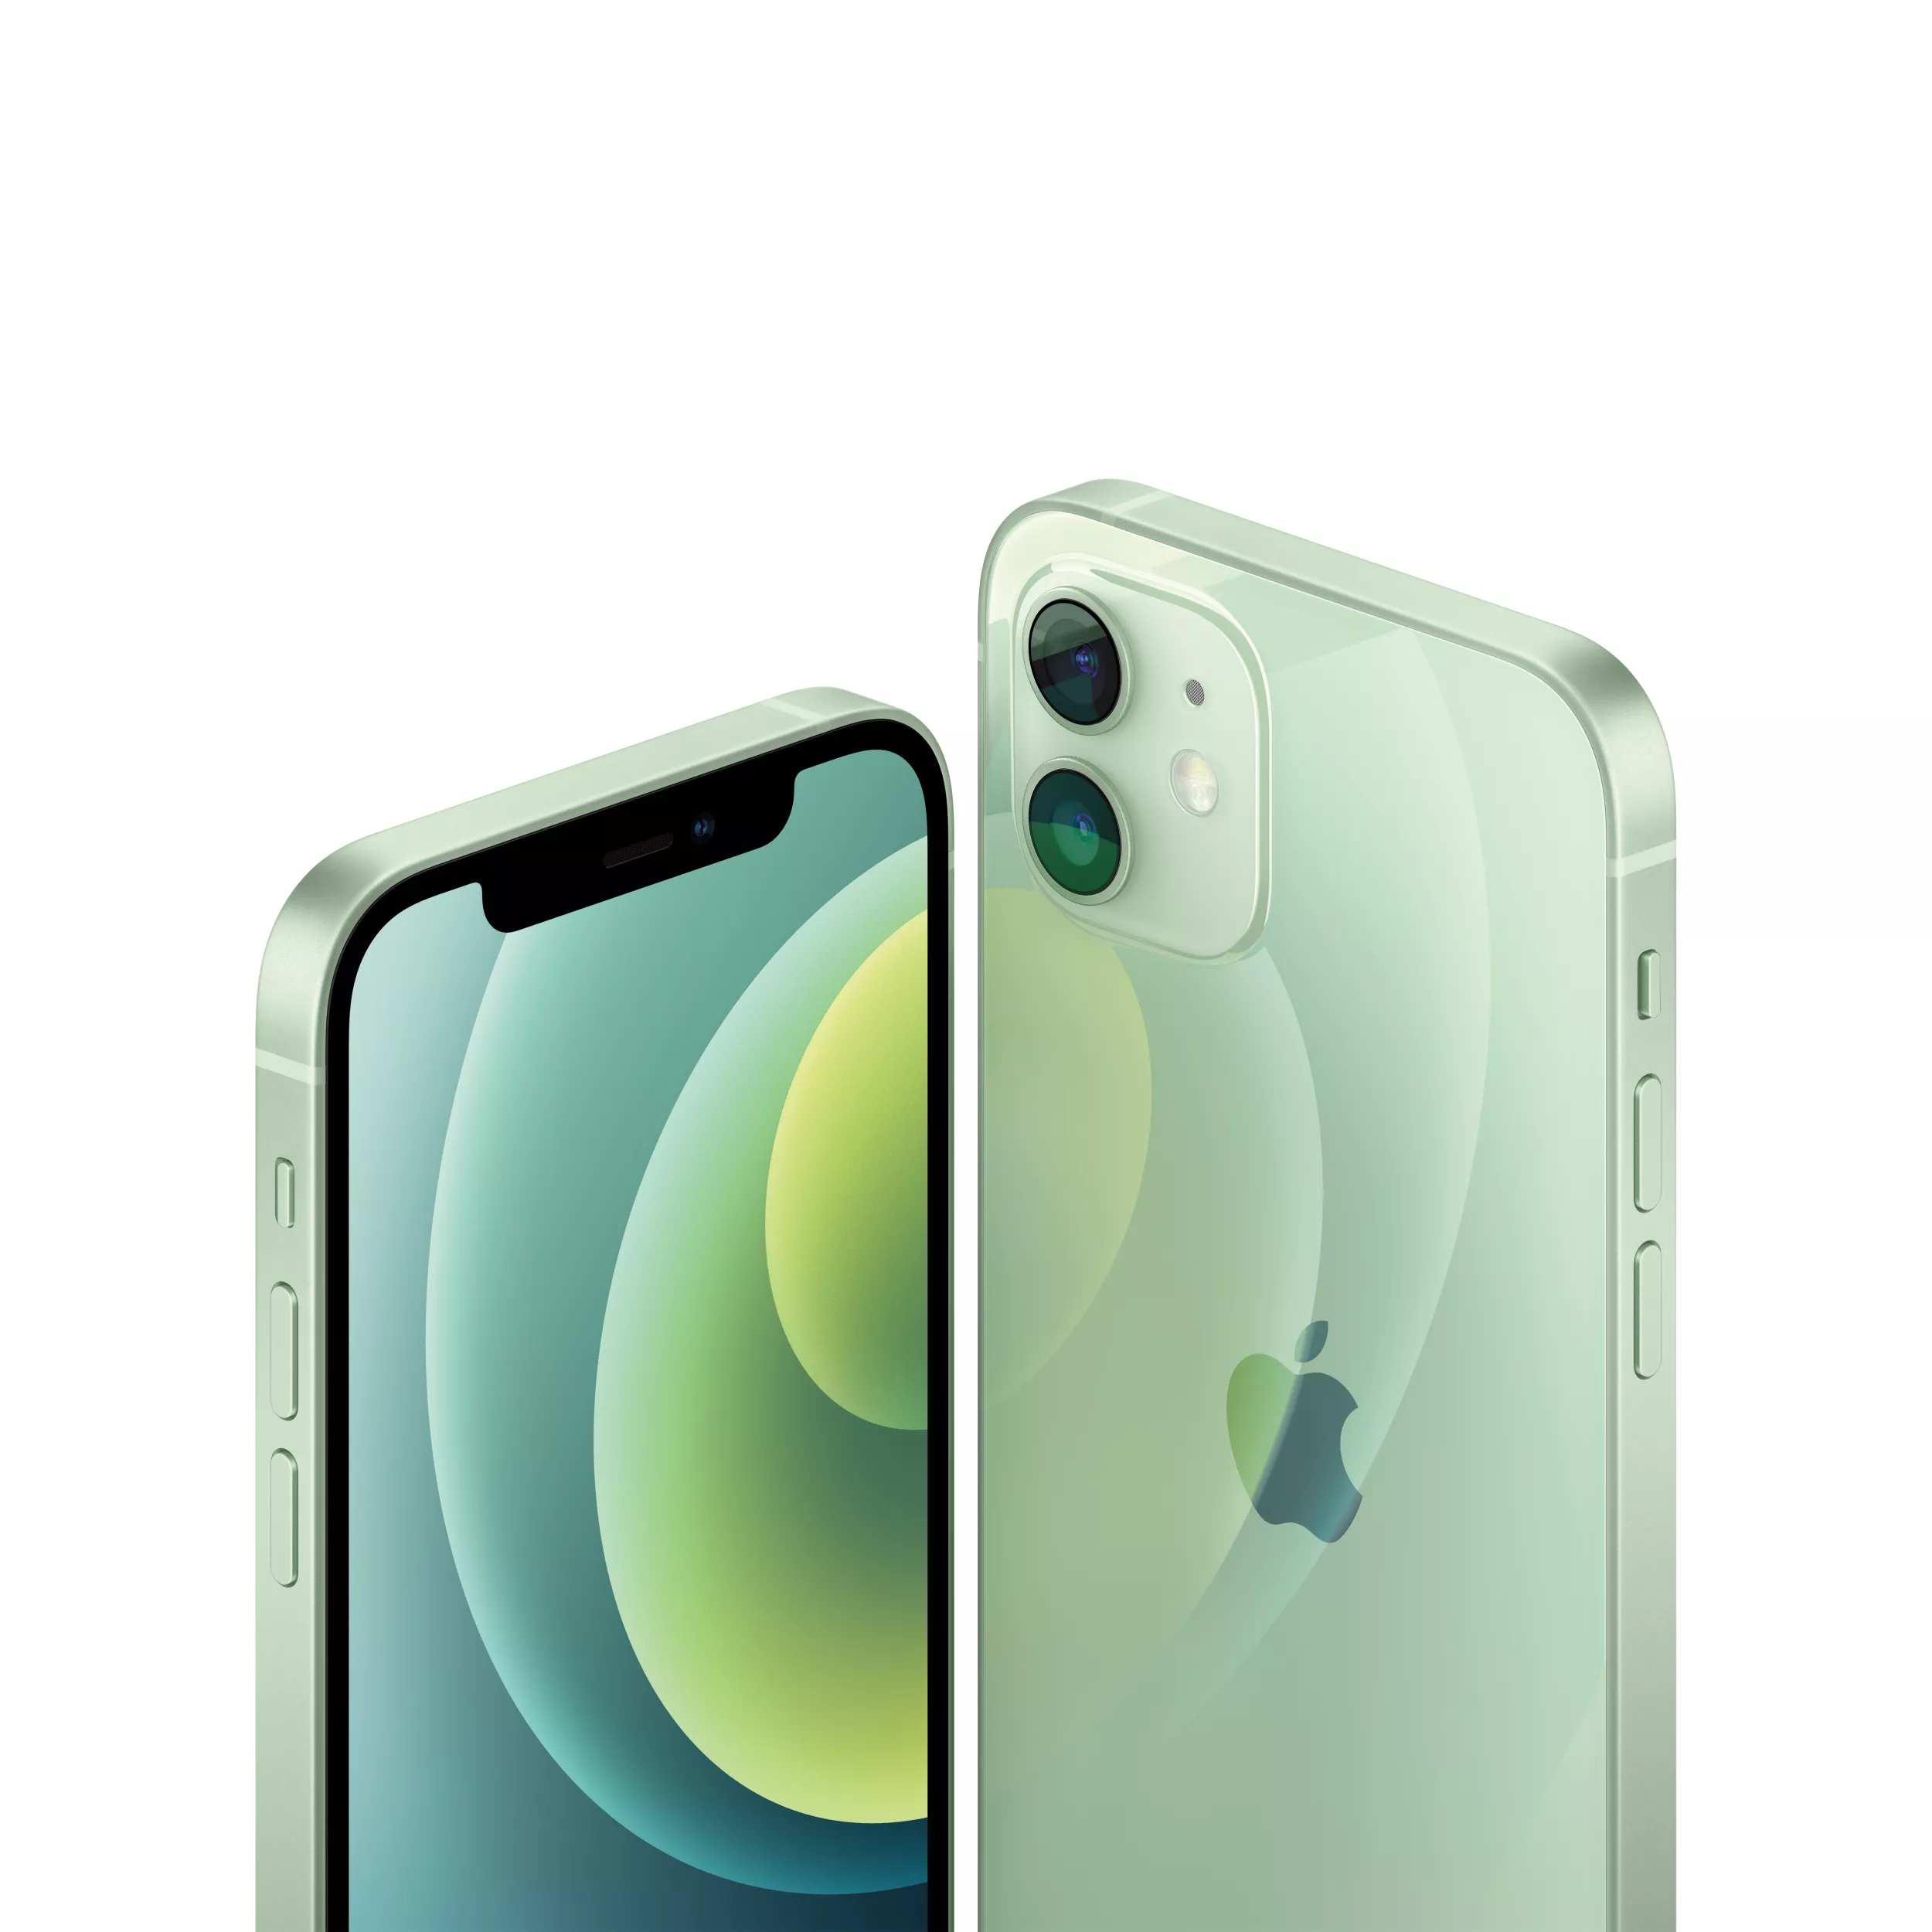 Buy iPhone 12 128GB, Green (MGJF3HN/A) at the Best Price in India